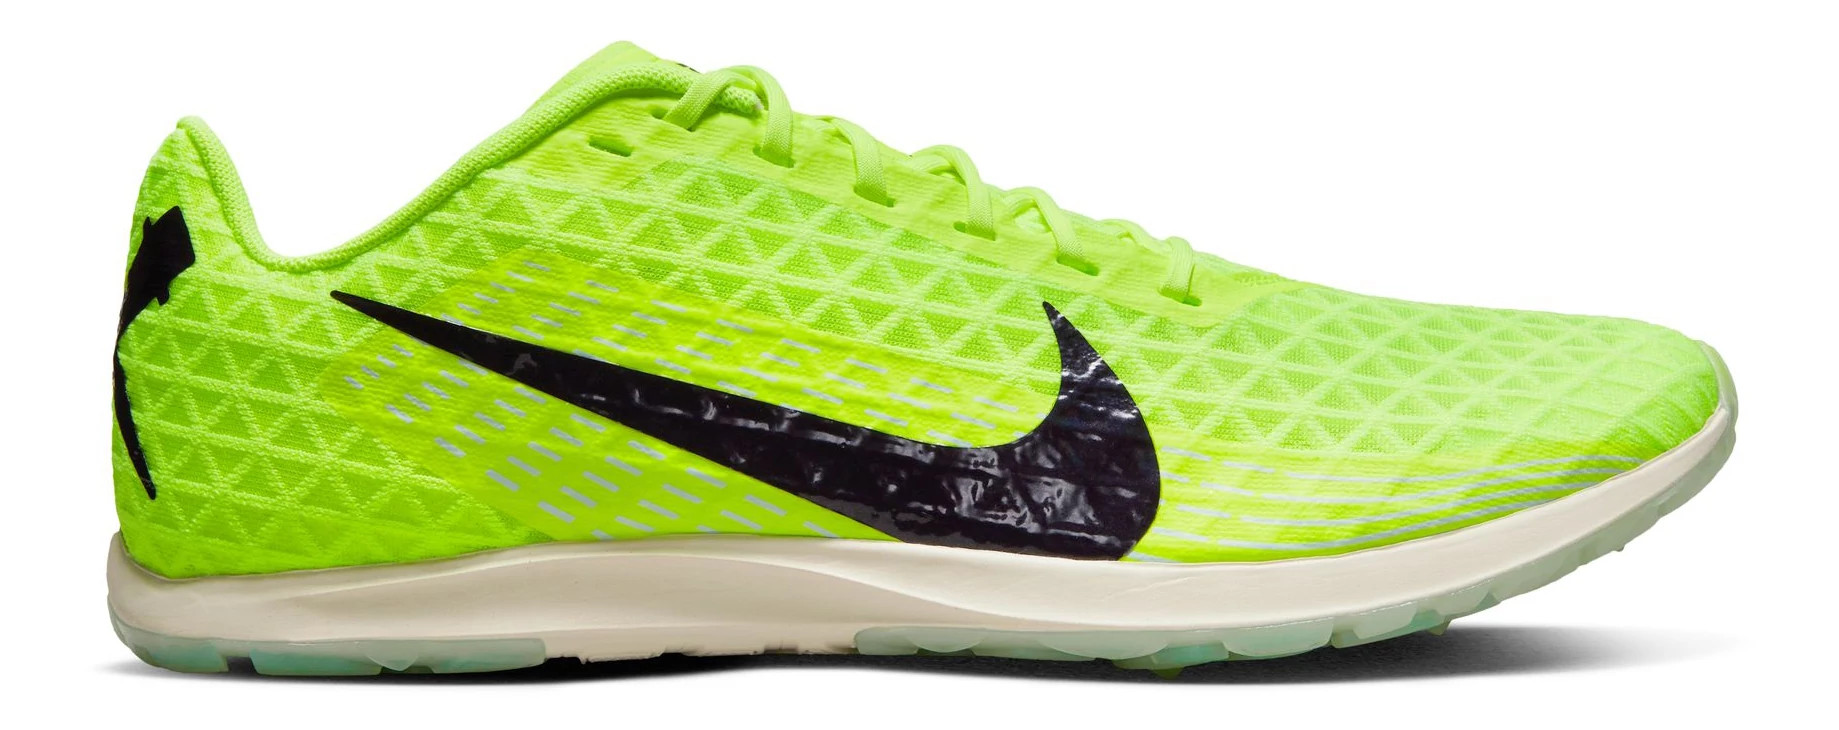 nike racing flats for cross country